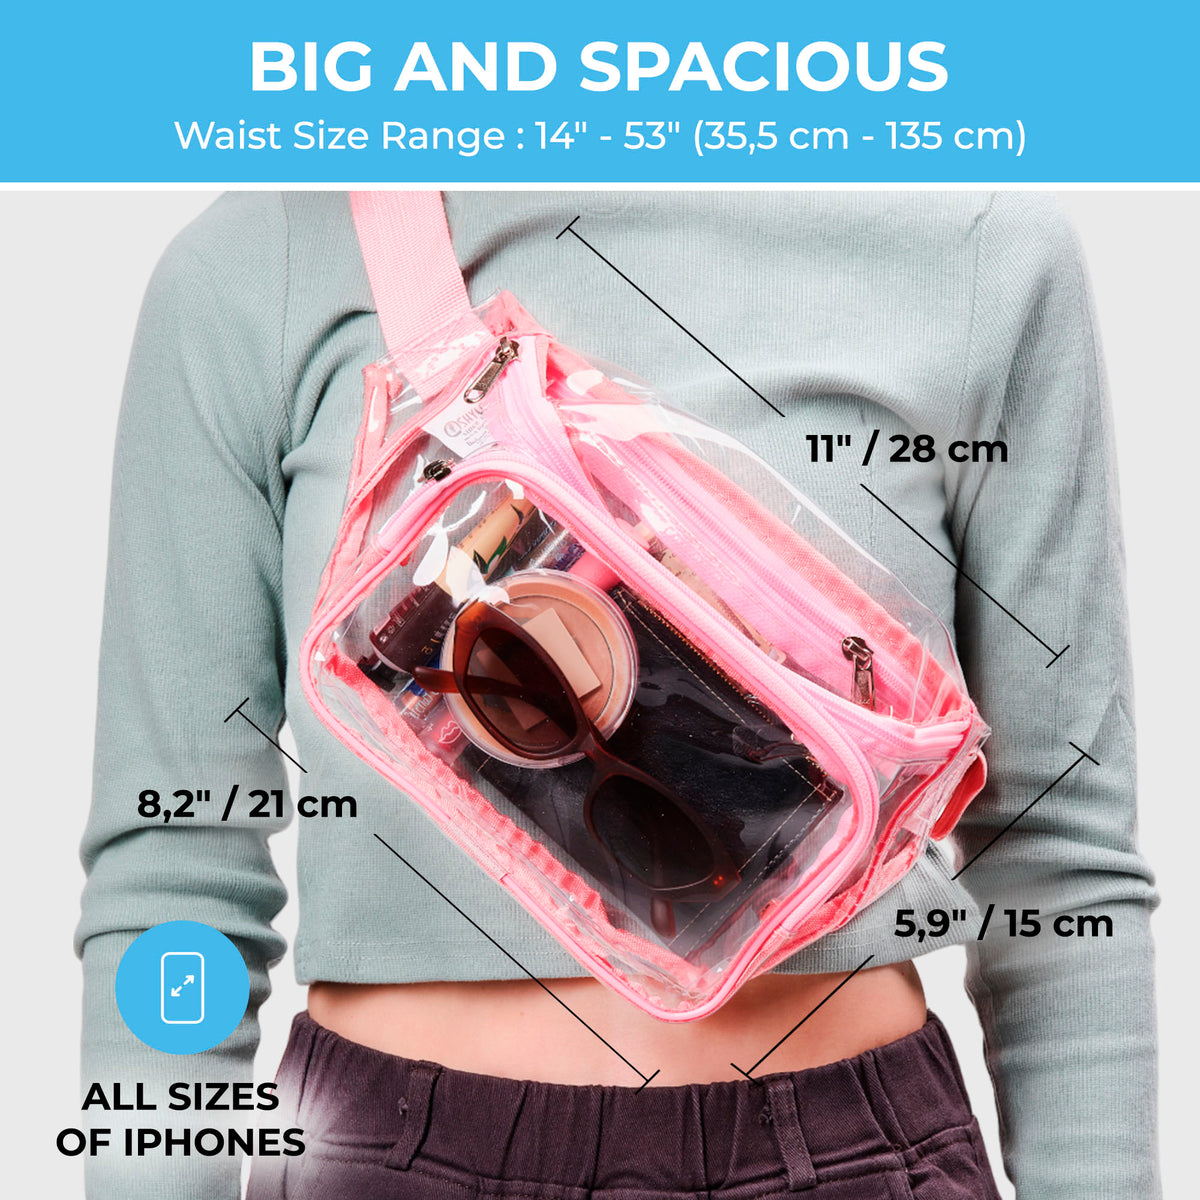 Clear Fanny Pack Stadium Approved | Top YKK® Zip | XL Size Friendly | Pink